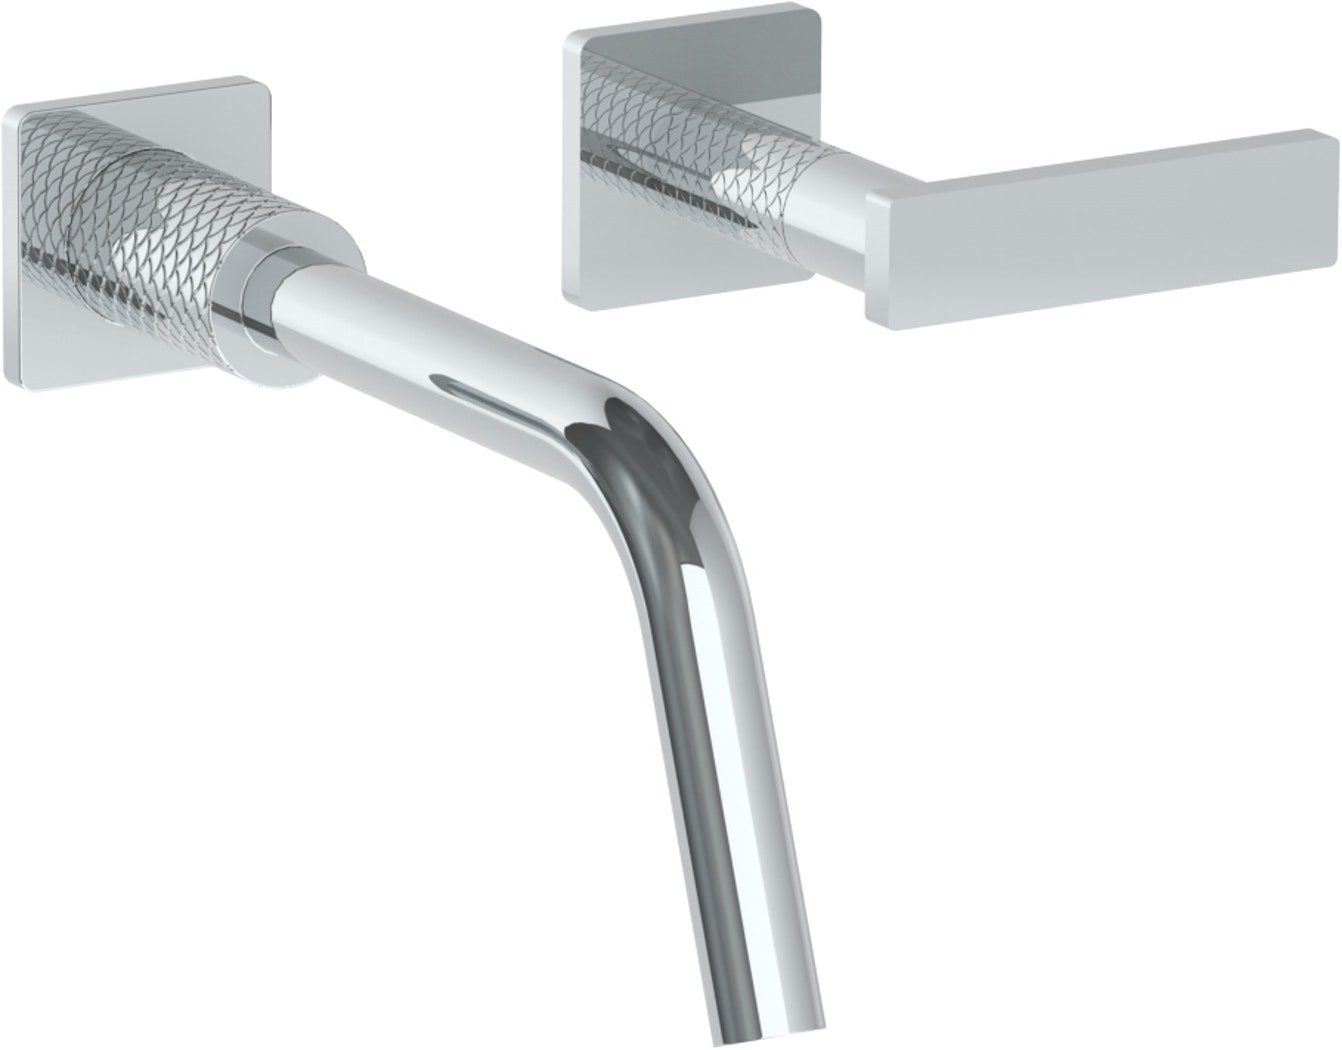 WATERMARK 71-1.2 LILY TWO HOLES WALL MOUNT BATHROOM FAUCET WITH 8 1/2 INCH SPOUT REACH